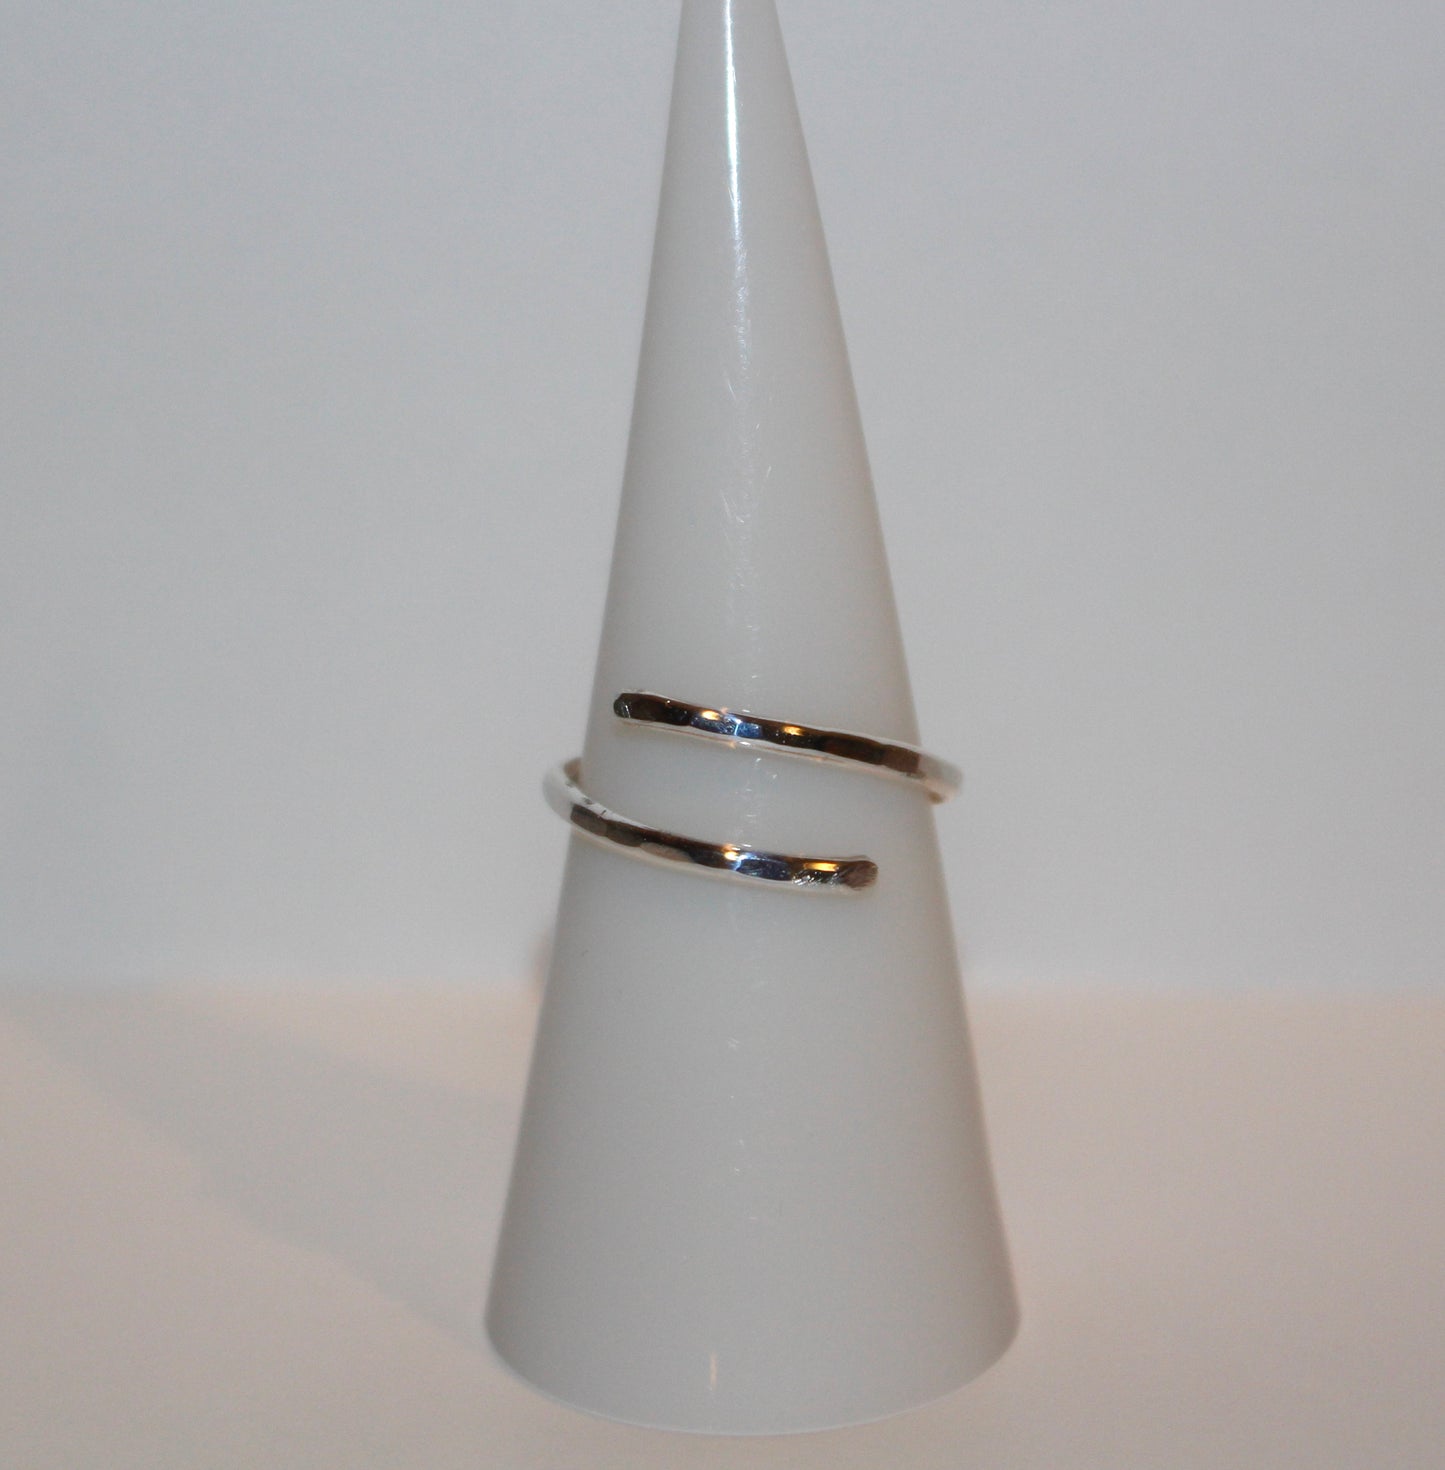 Wrap Around Adjustable Sterling Silver Ring - Can be worn in two ways!